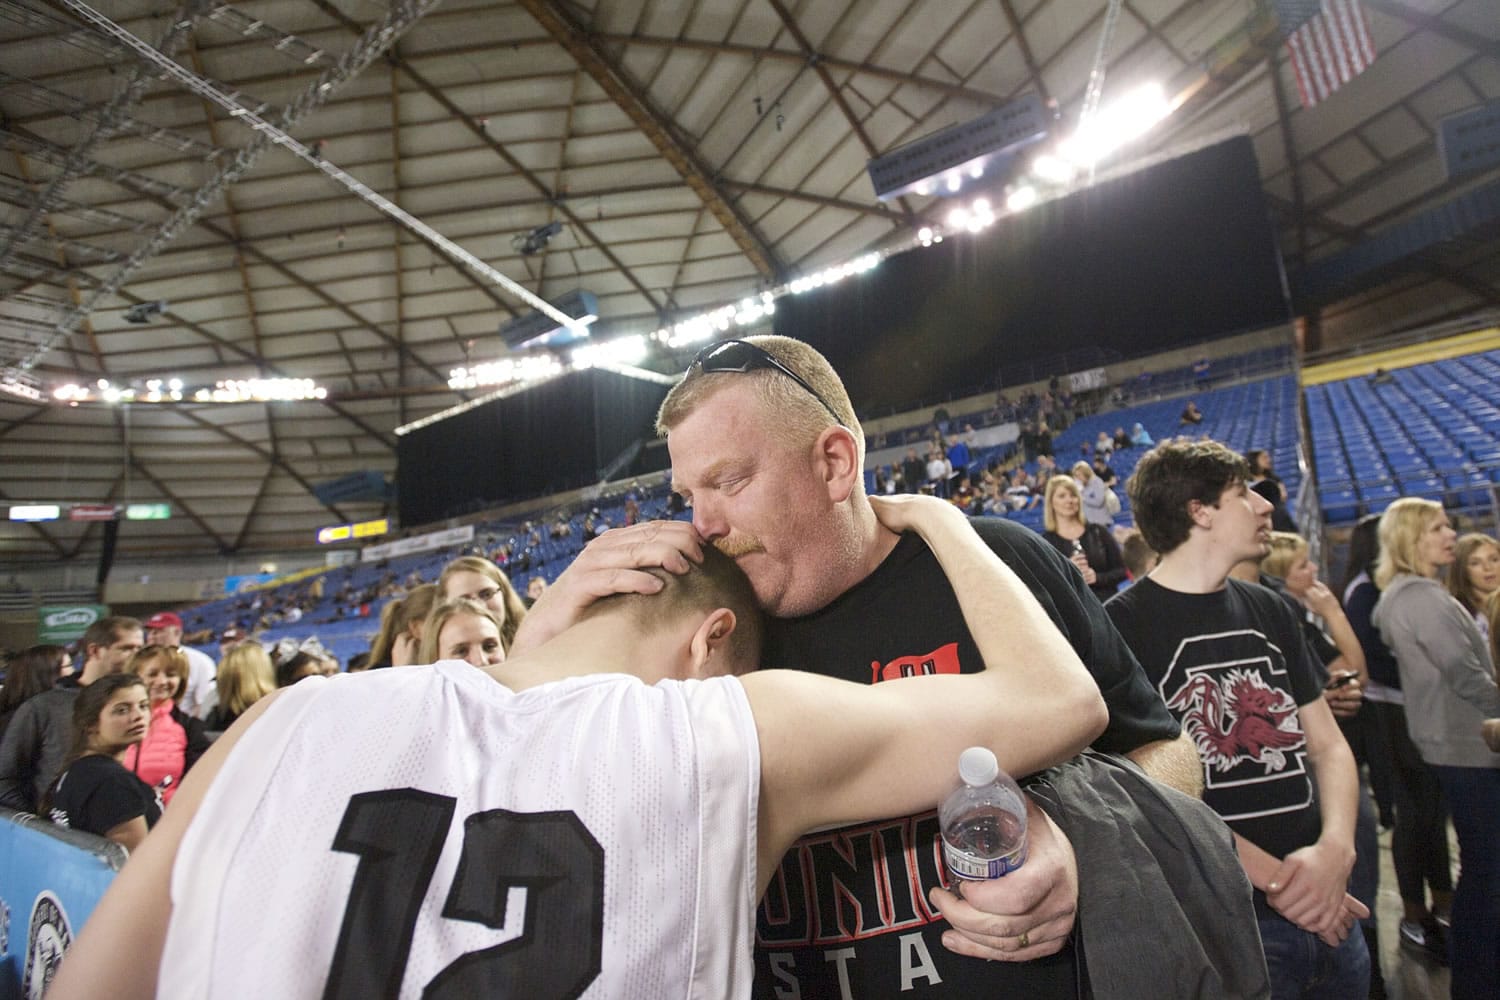 Doug Paulson comforts his son Micah Paulson as Union beats Woodinville 69-45 to win third place at the 2015 WIAA Hardwood Classic 4A Boys tournament at the Tacoma Dome, Saturday, March 7, 2015.